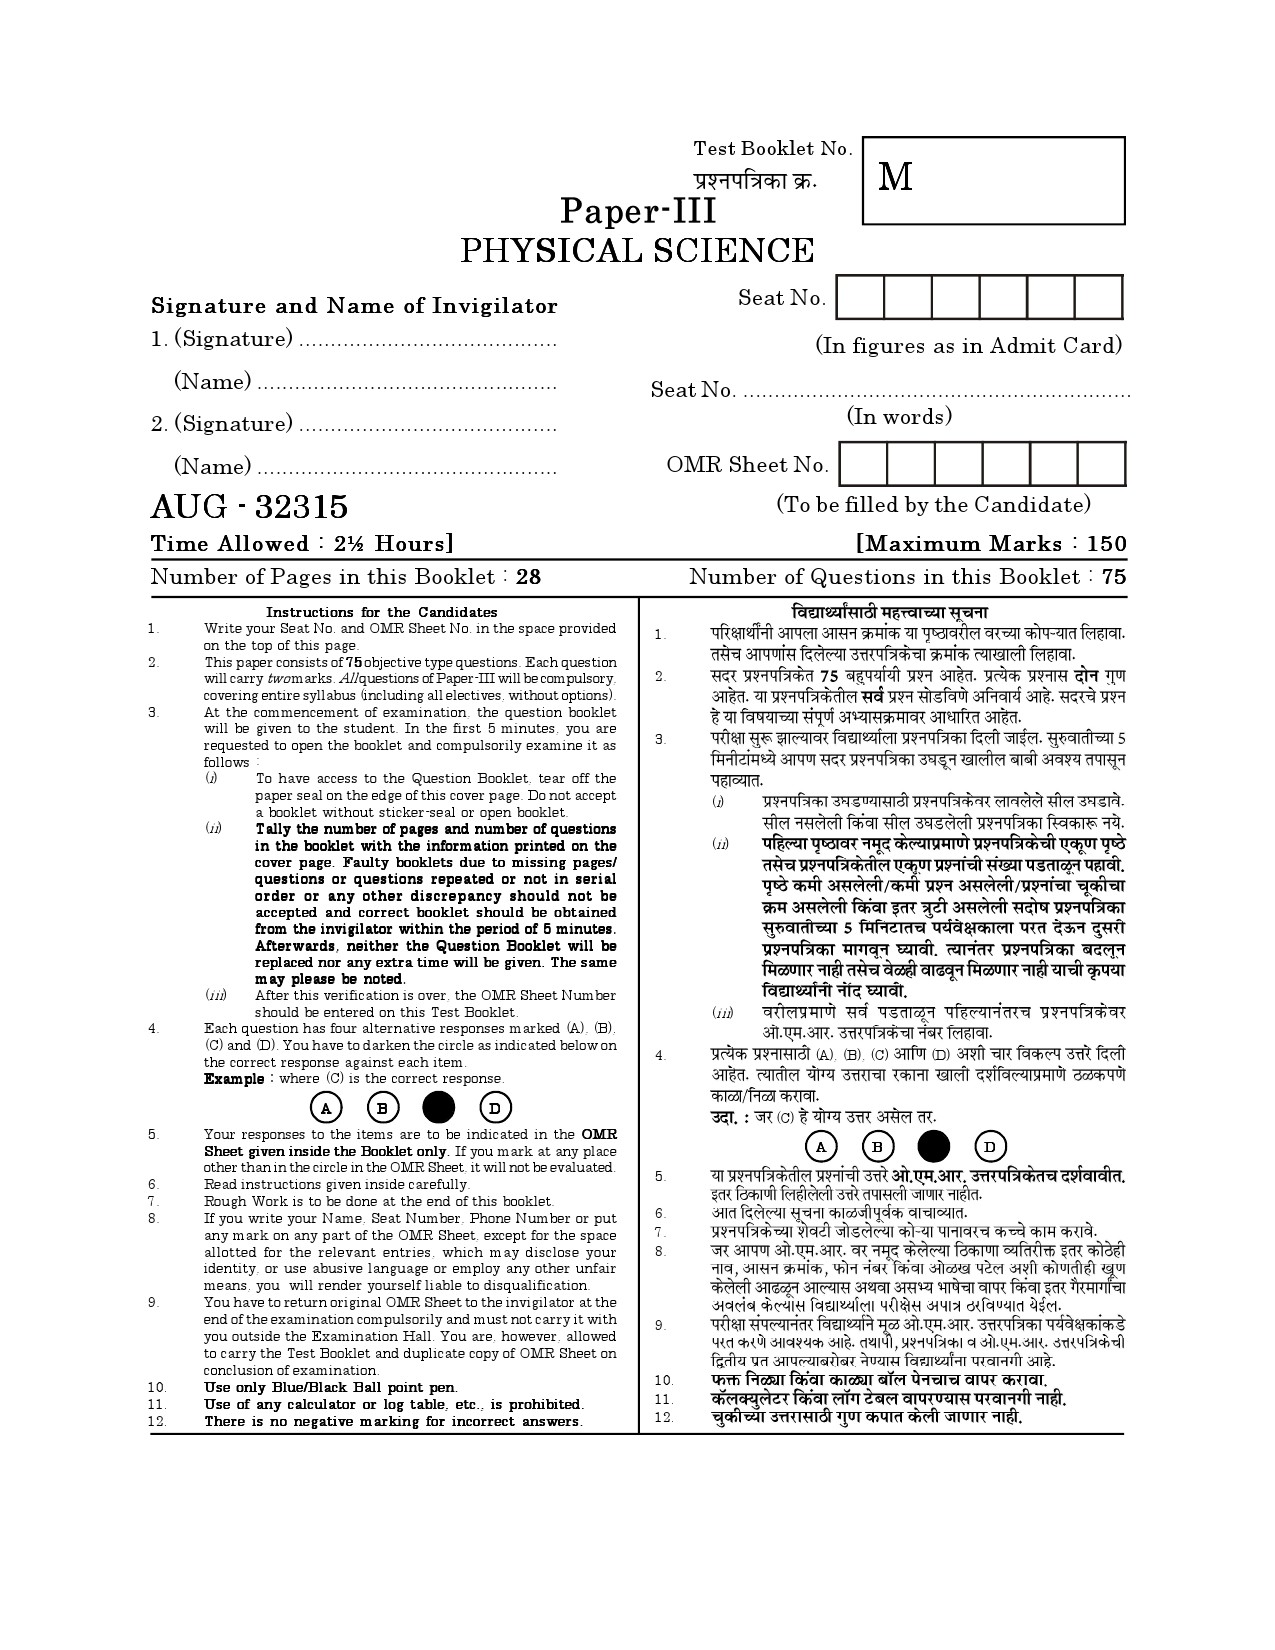 Maharashtra SET Physical Science Question Paper III August 2015 1